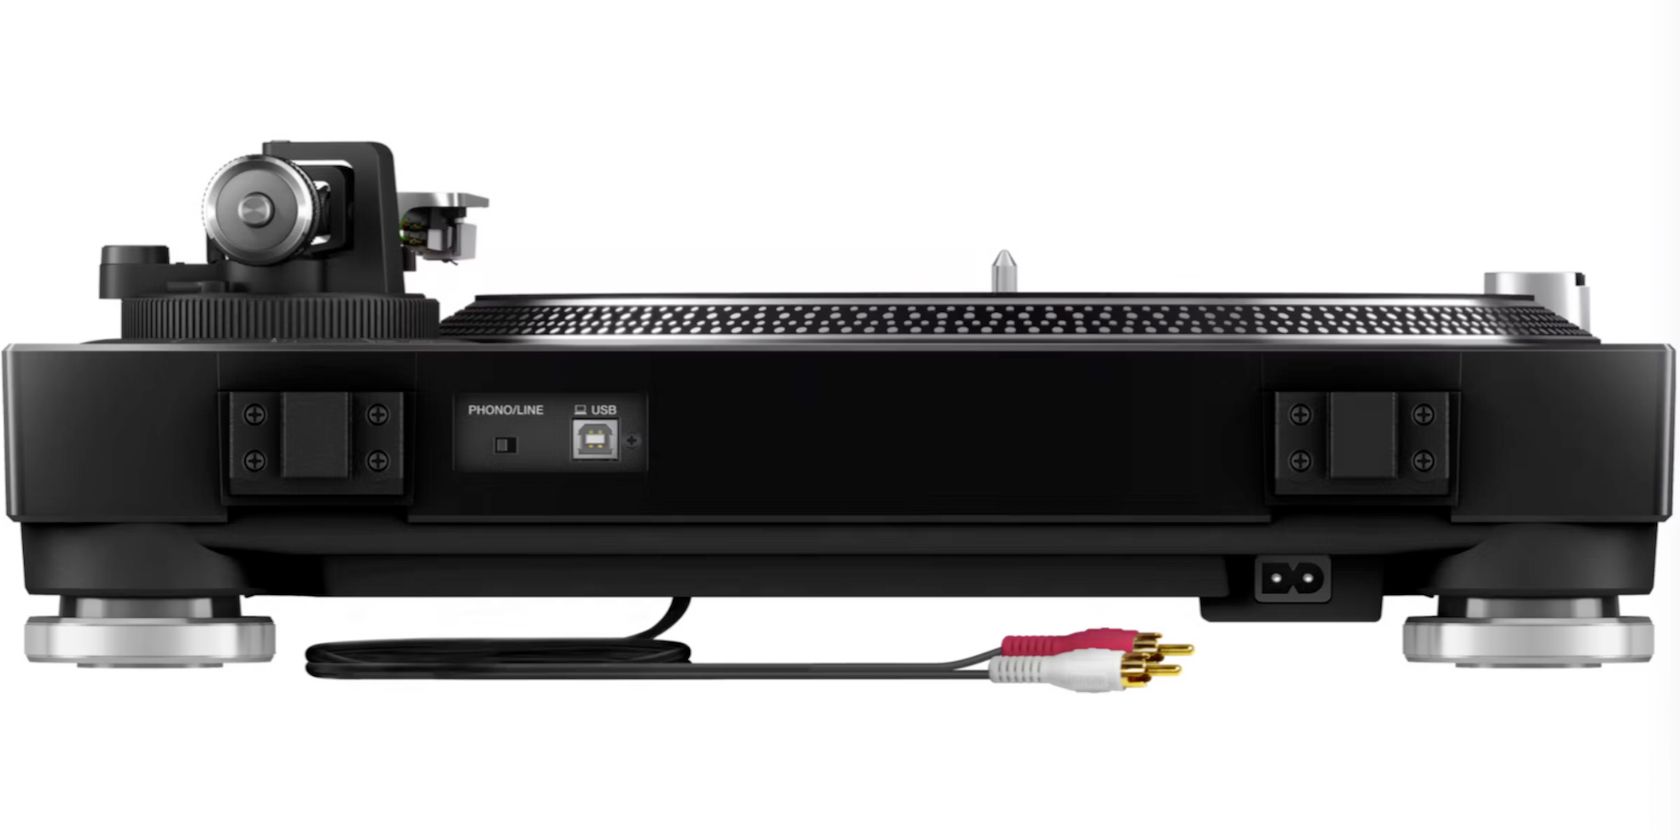 Pioneer PLX500 turntable rear side showing connection ports